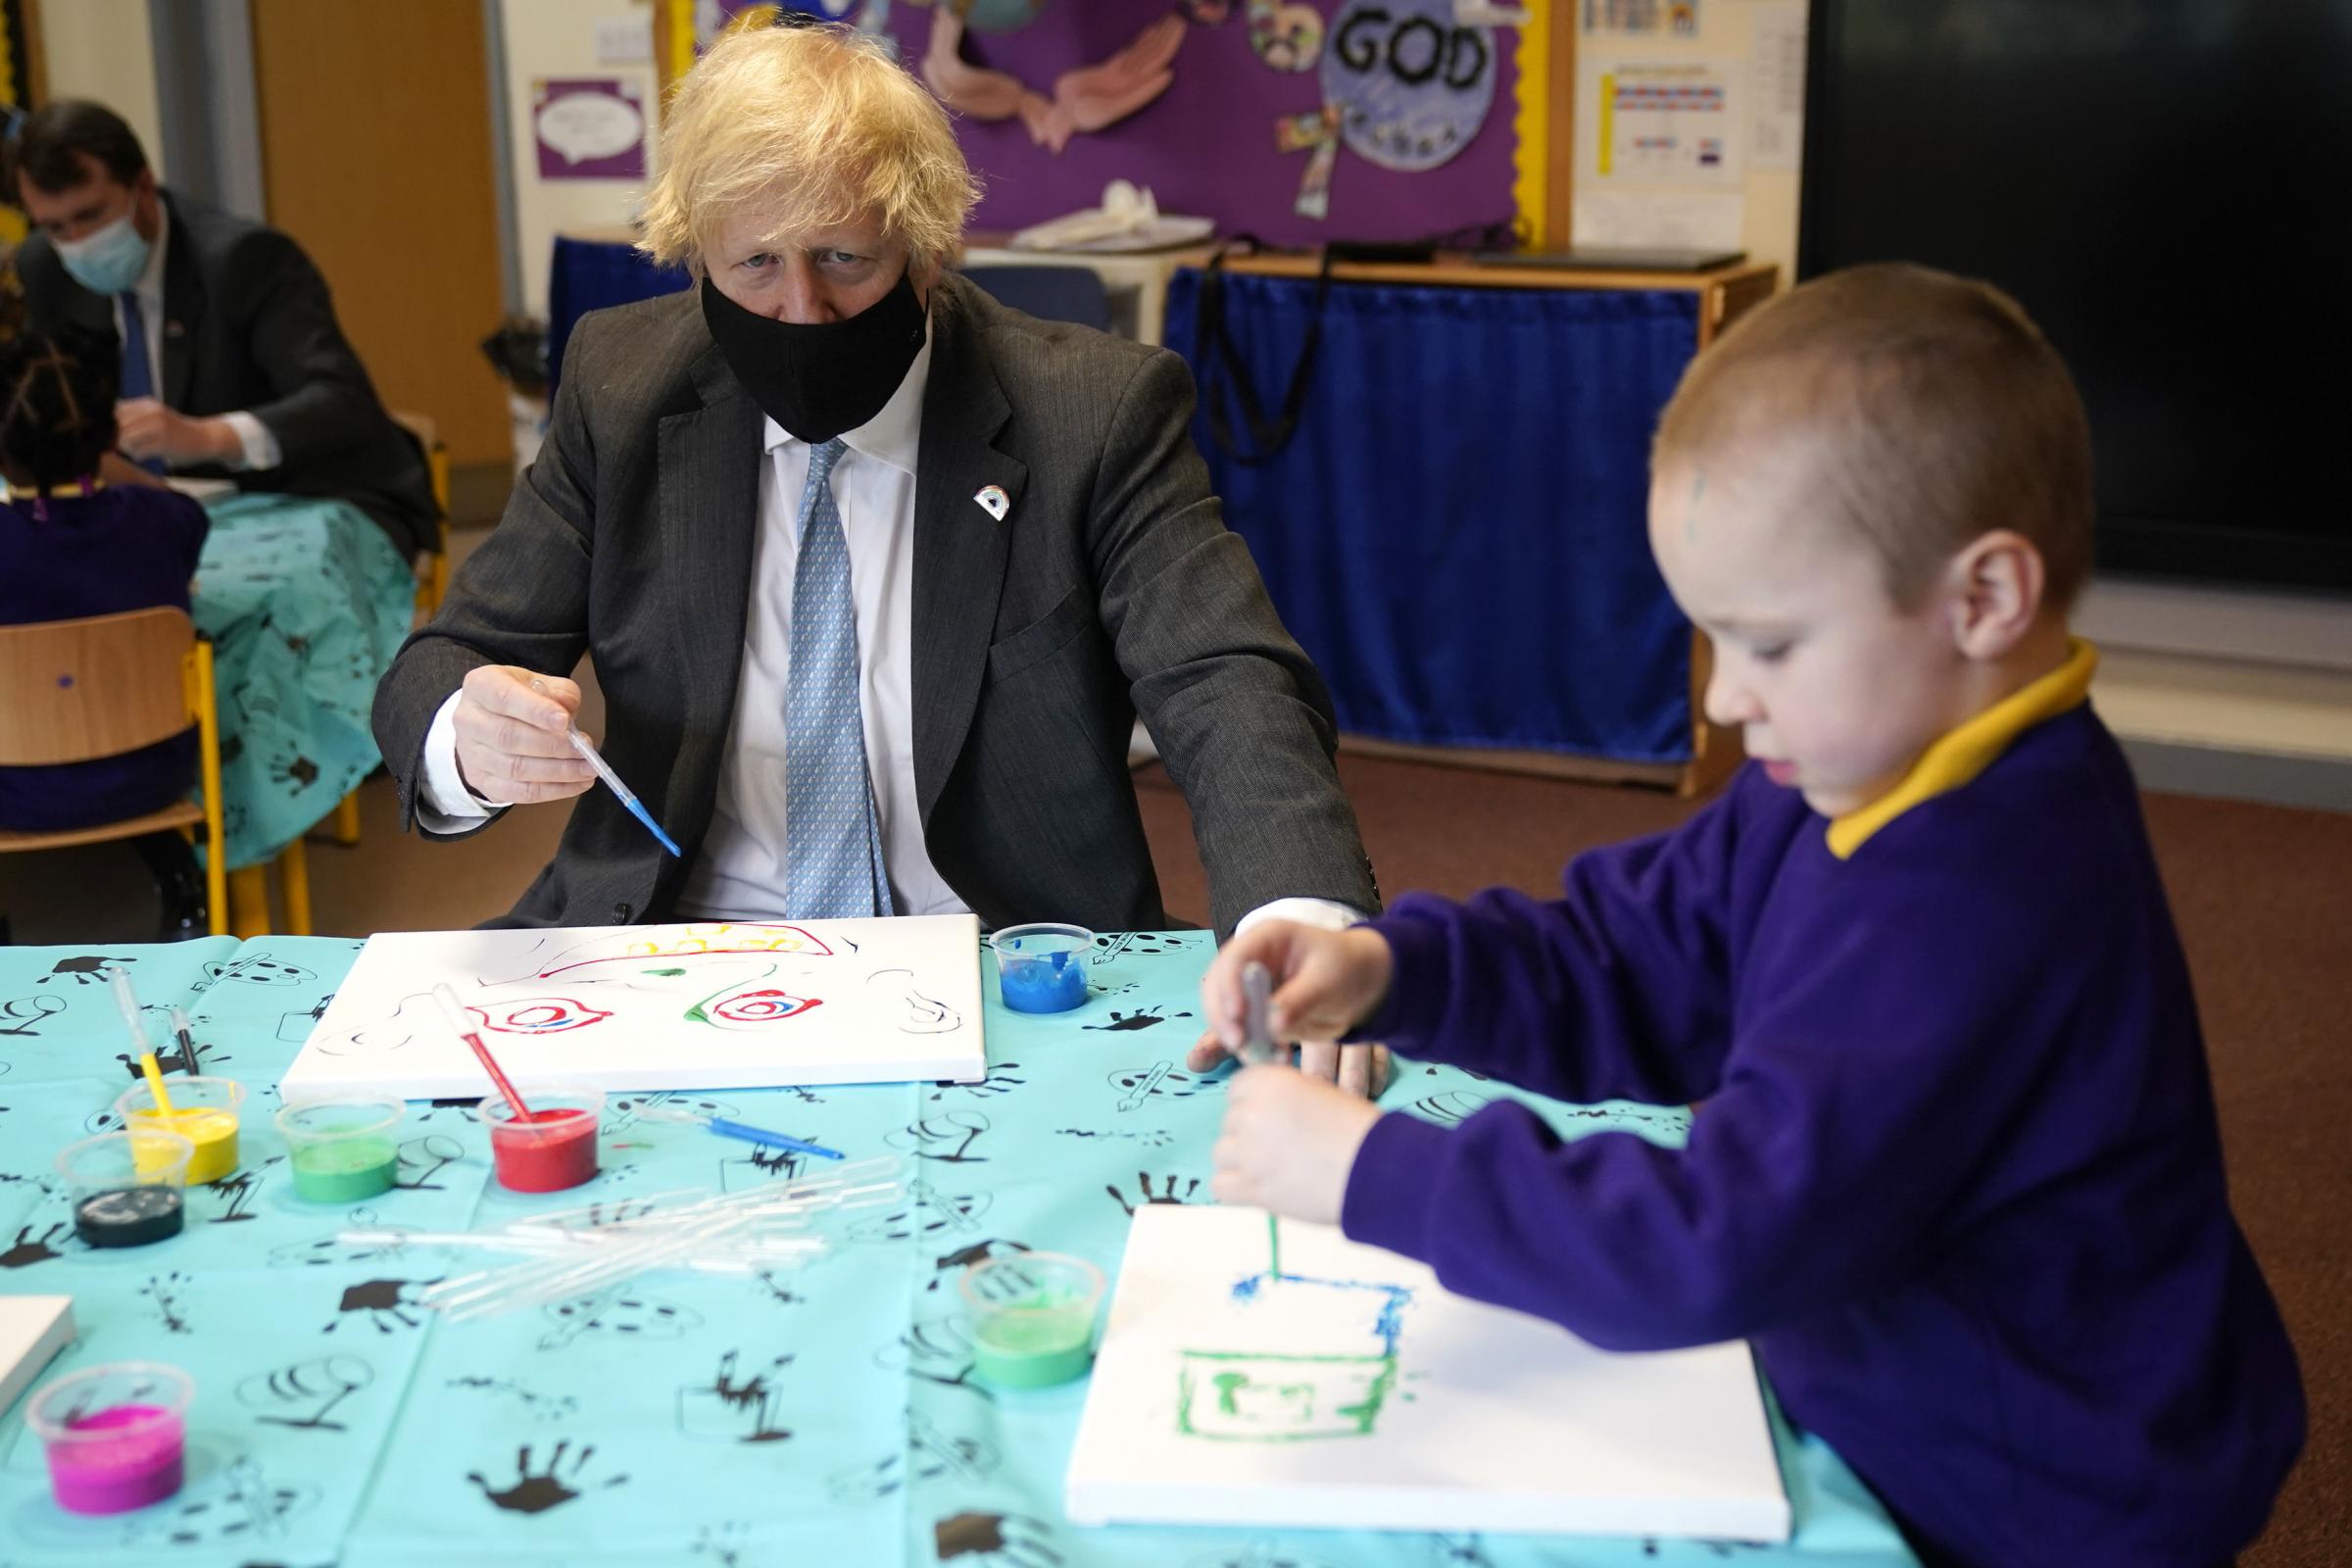 Prime Minister Boris Johnson joins a reception class painting lesson during a visit to St Marys CE Primary School in Stoke-on-Trent, Staffordshire, to see how they are preparing for students to return. Picture date: Monday March 1, 2021. PA Photo. See